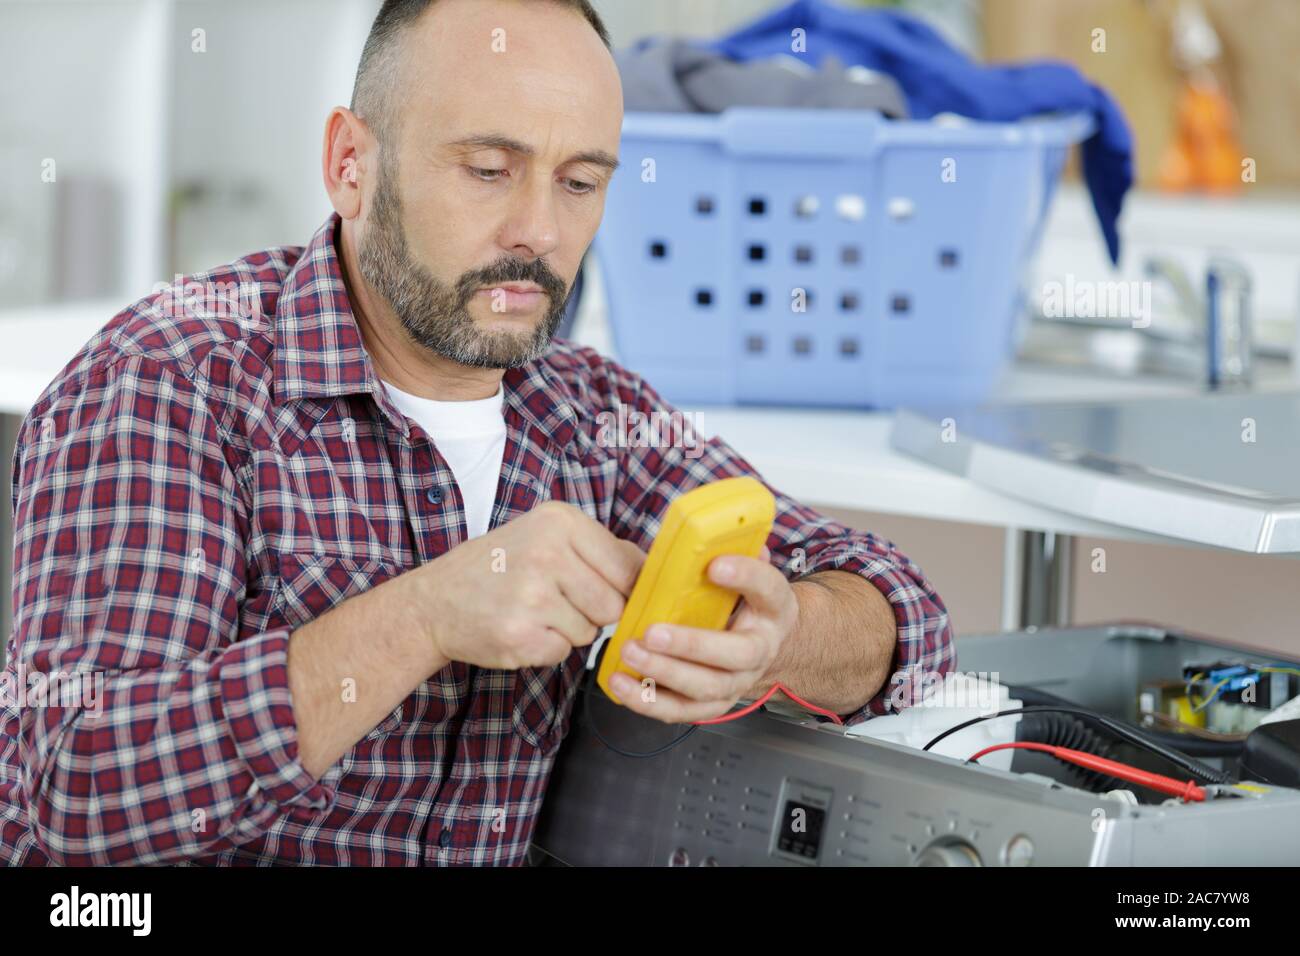 man using a multimeter to find washing machine fault Stock Photo